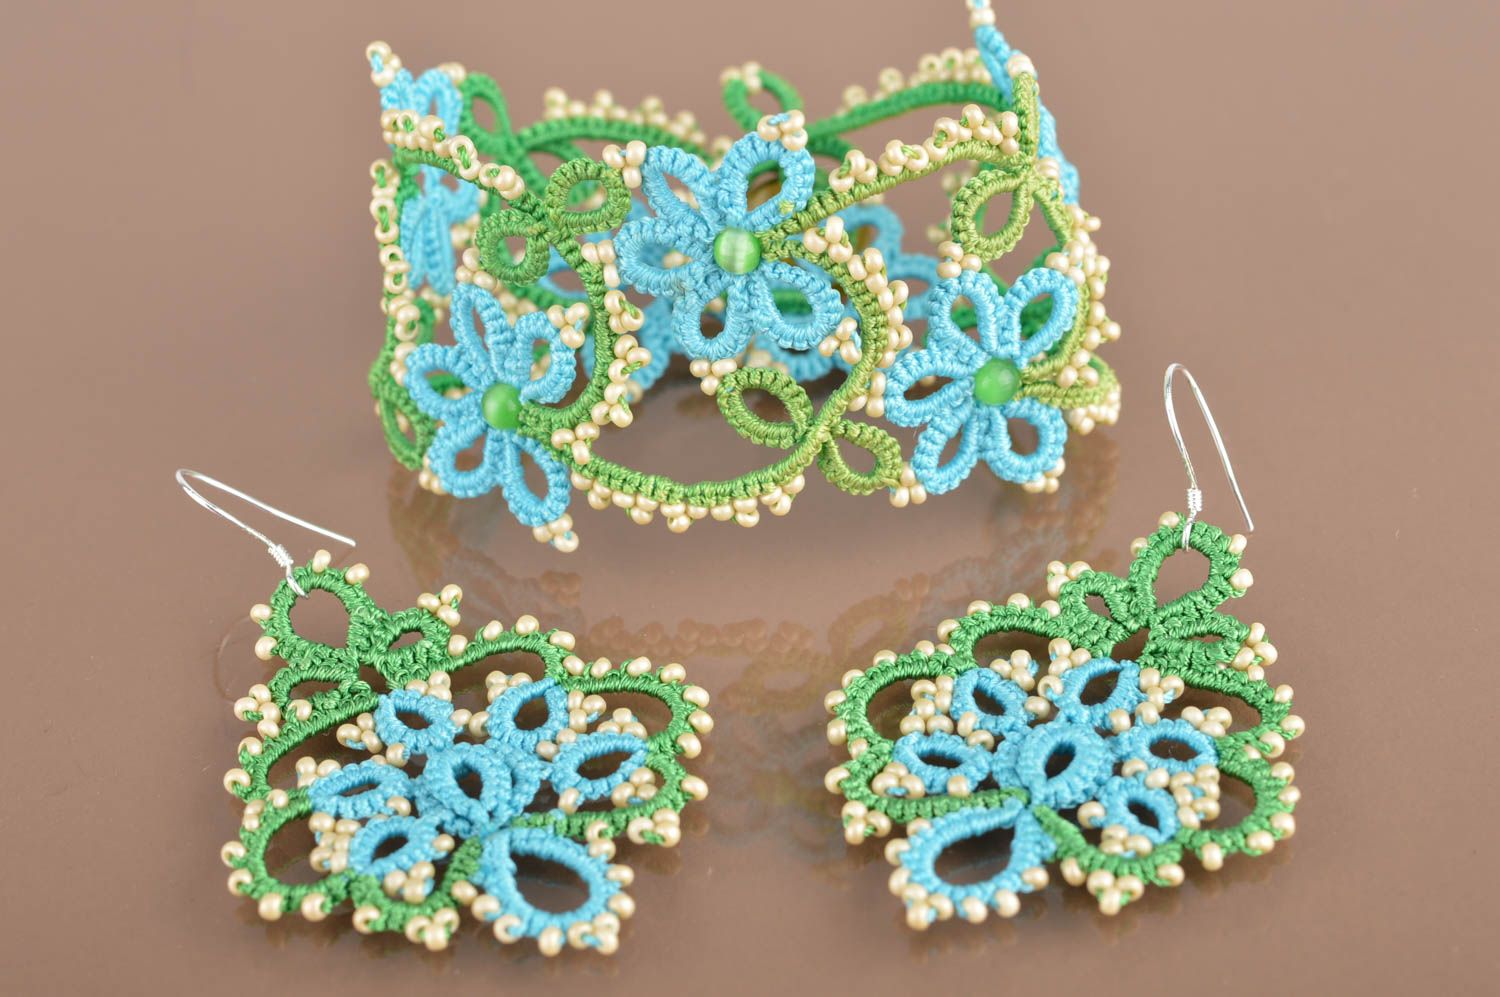 Handmade tatted jewelry set 2 items blue and green earrings and wrist bracelet photo 4